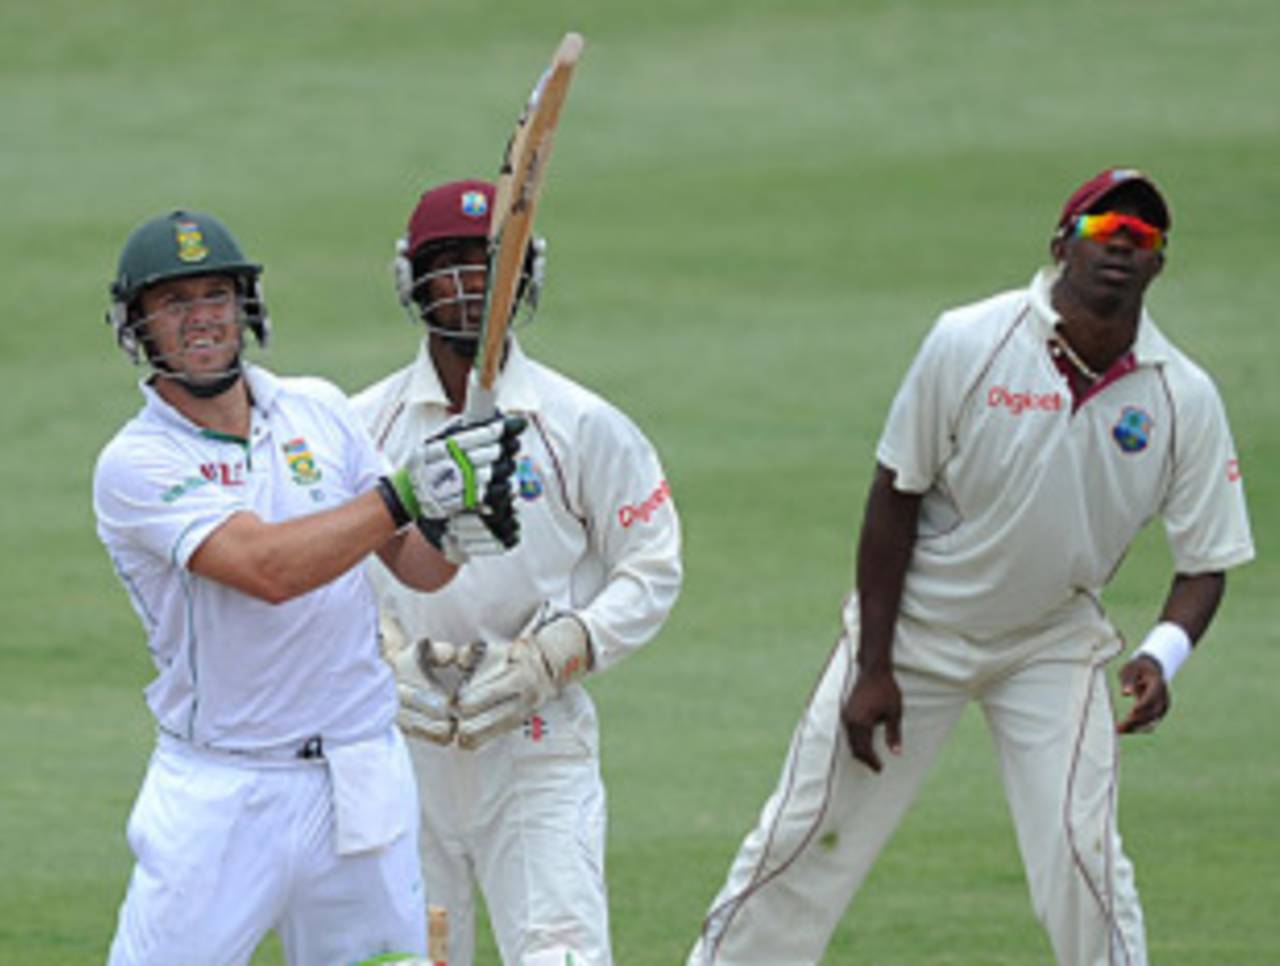 AB de Villiers goes over the ropes as the fielders look on, West Indies v South Africa, 2nd Test, St Kitts, 2nd day, June 19, 2010